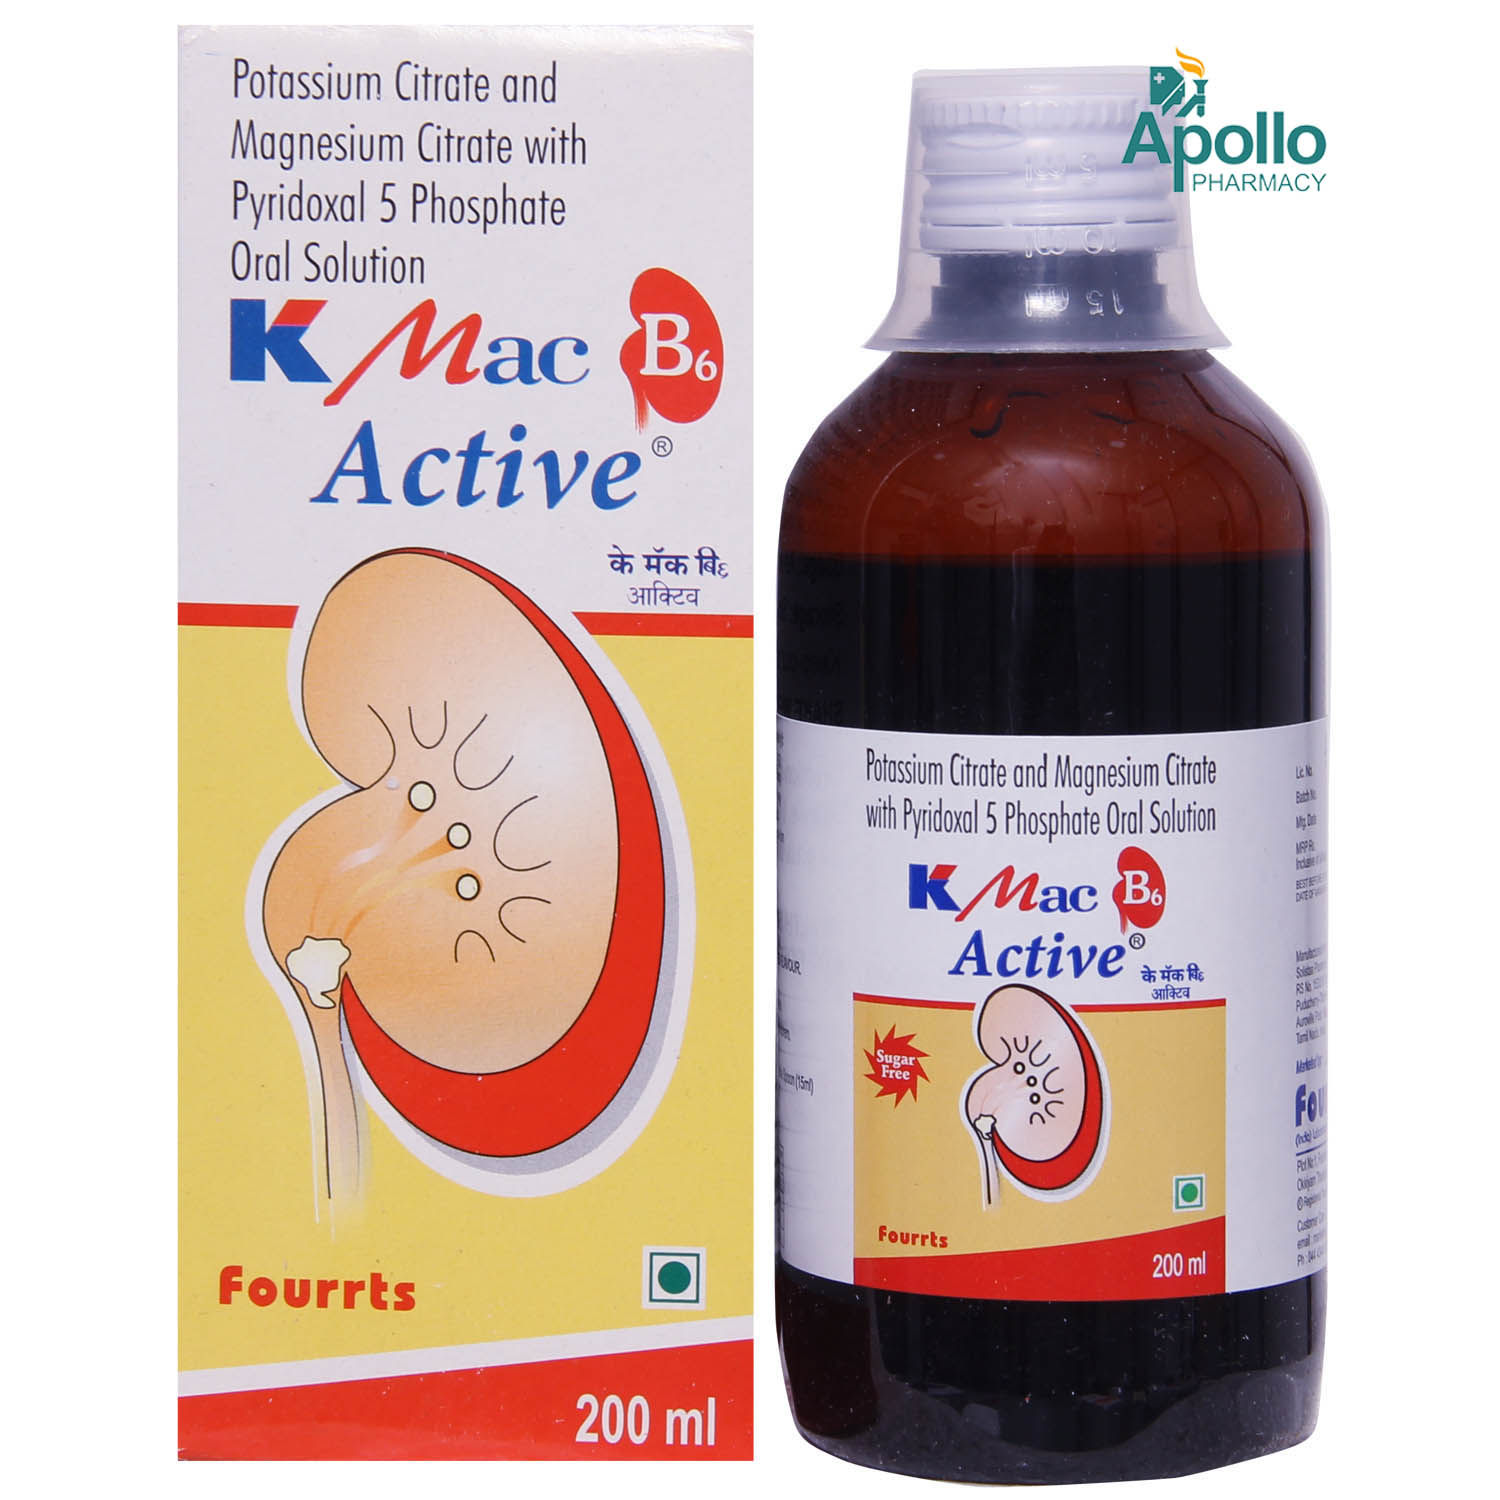 K Mac B6 Active Oral Solution 200 ml, Pack of 1 SOLUTION